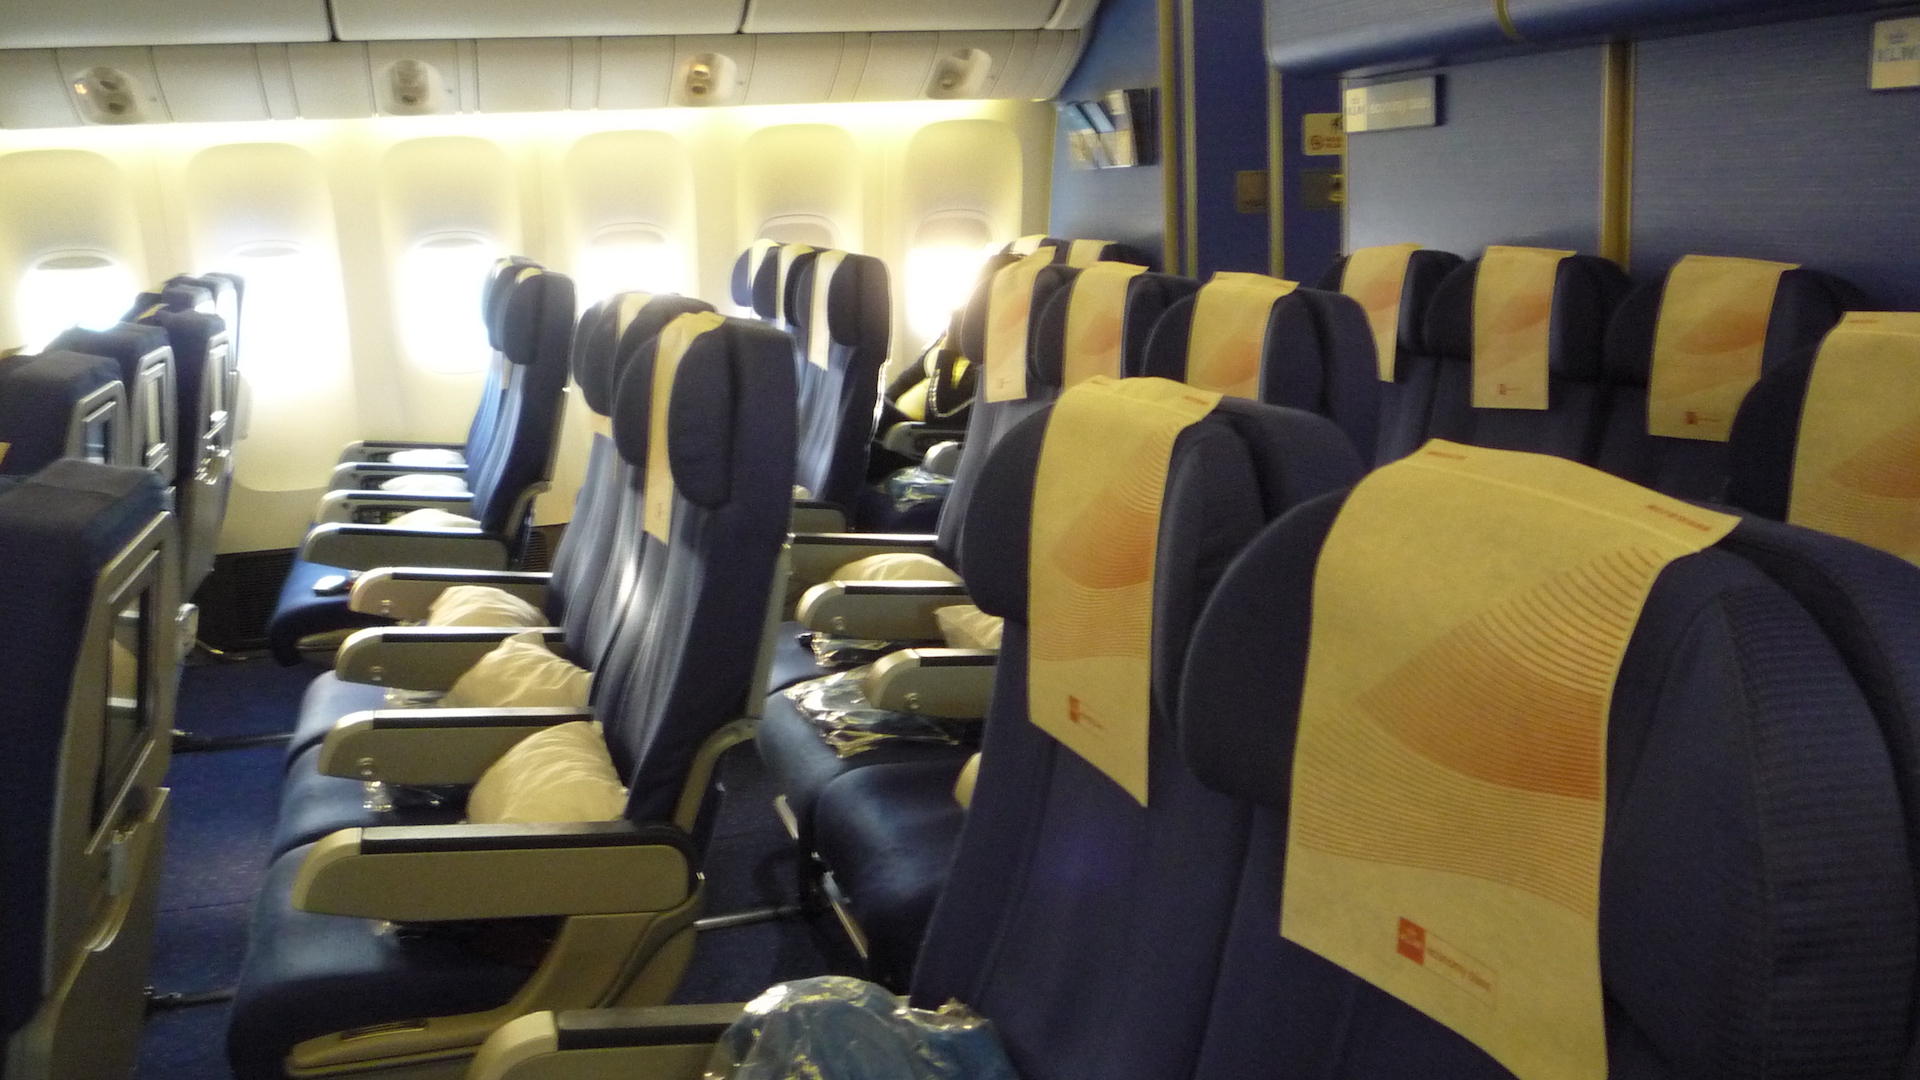 Rows of empty seats on a plane